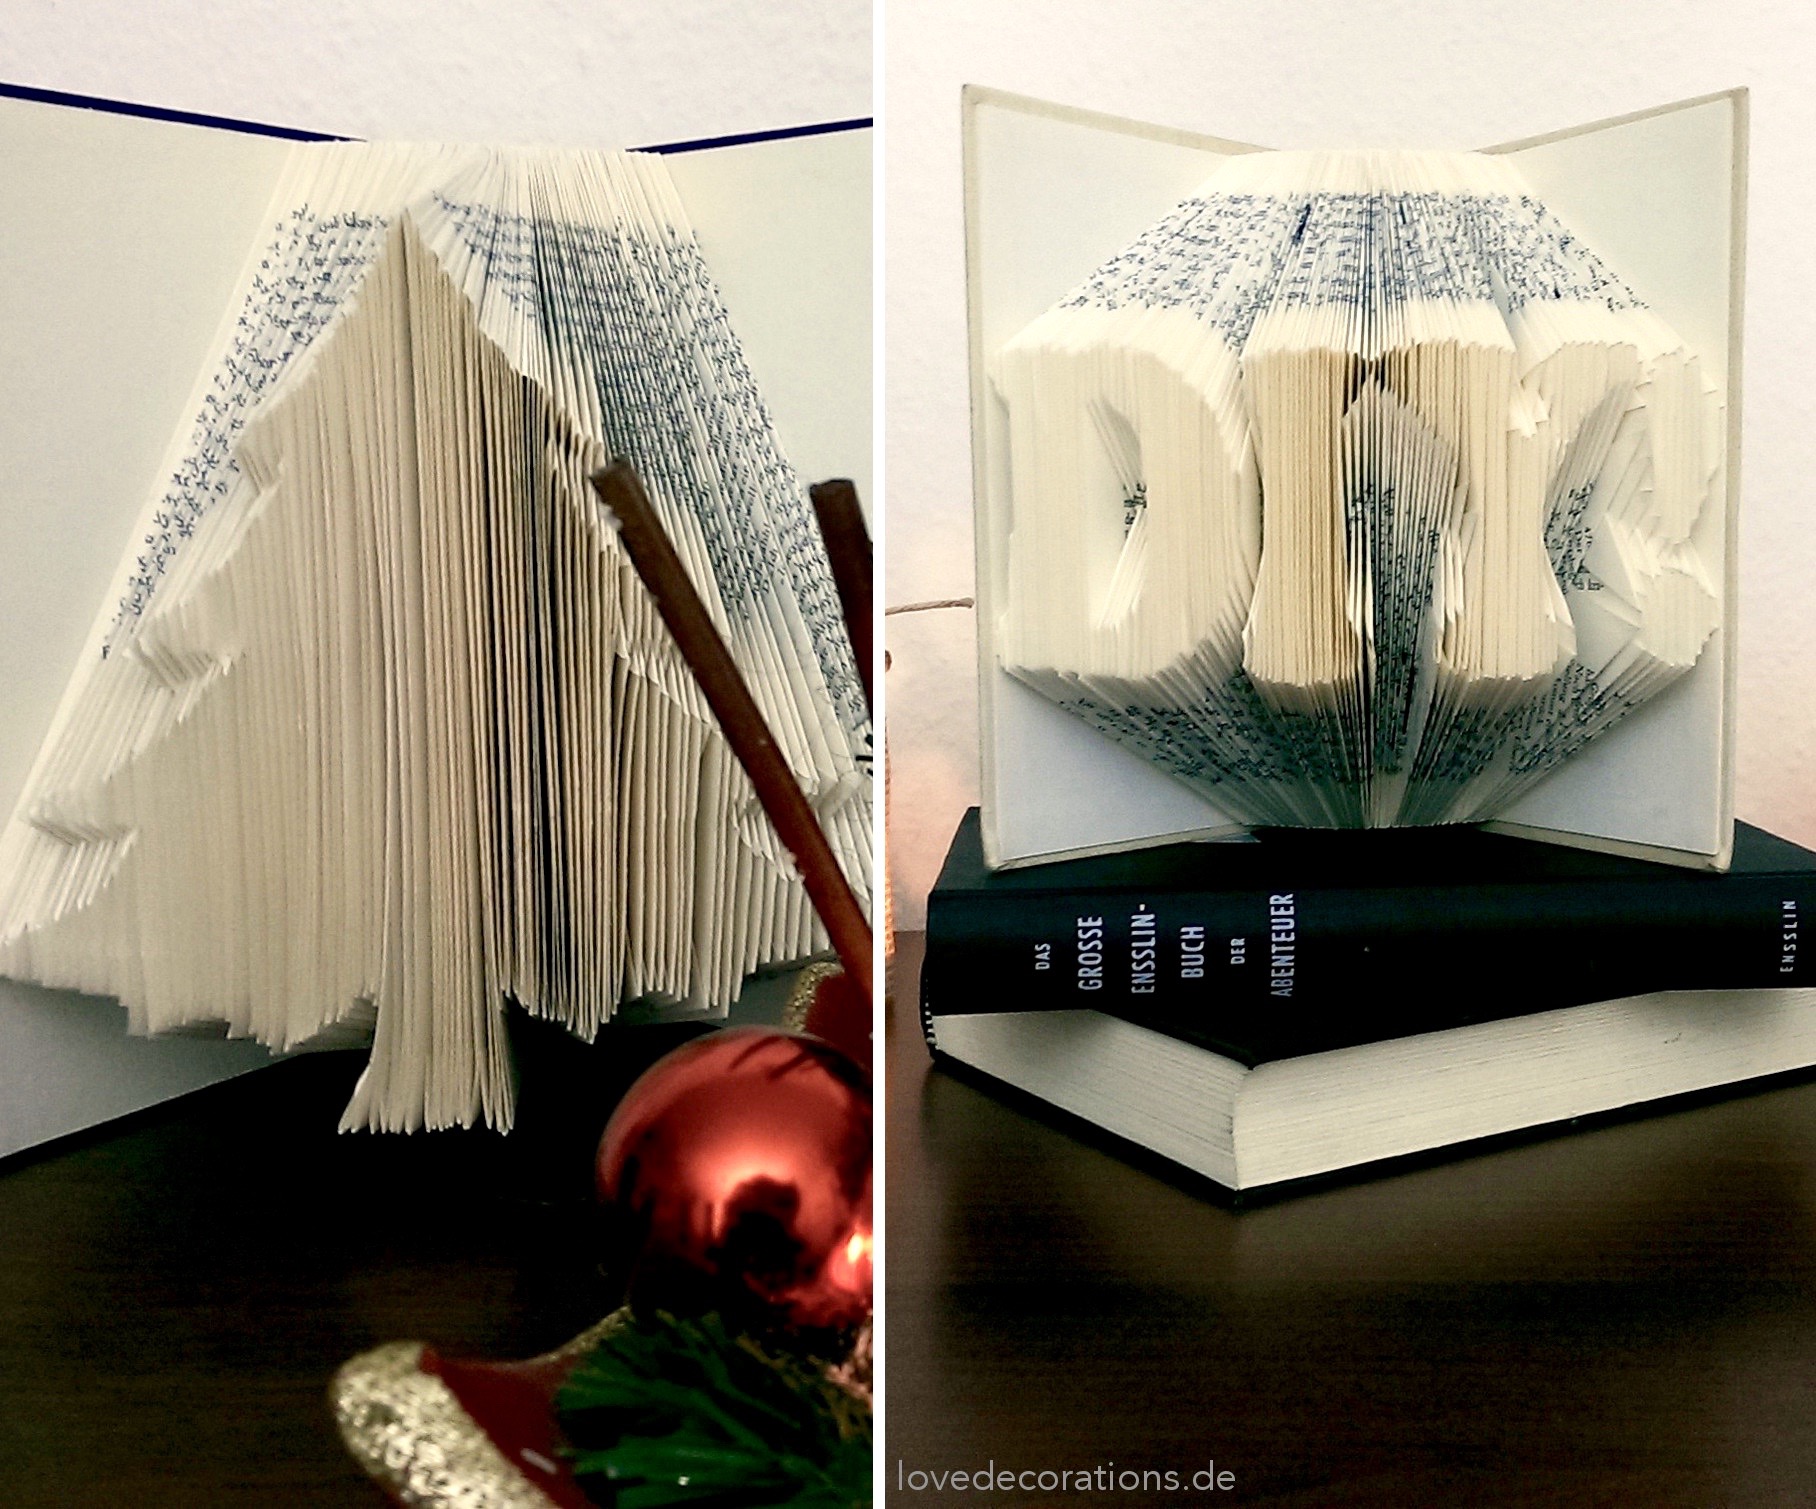 Buch Origami - Love Decorations